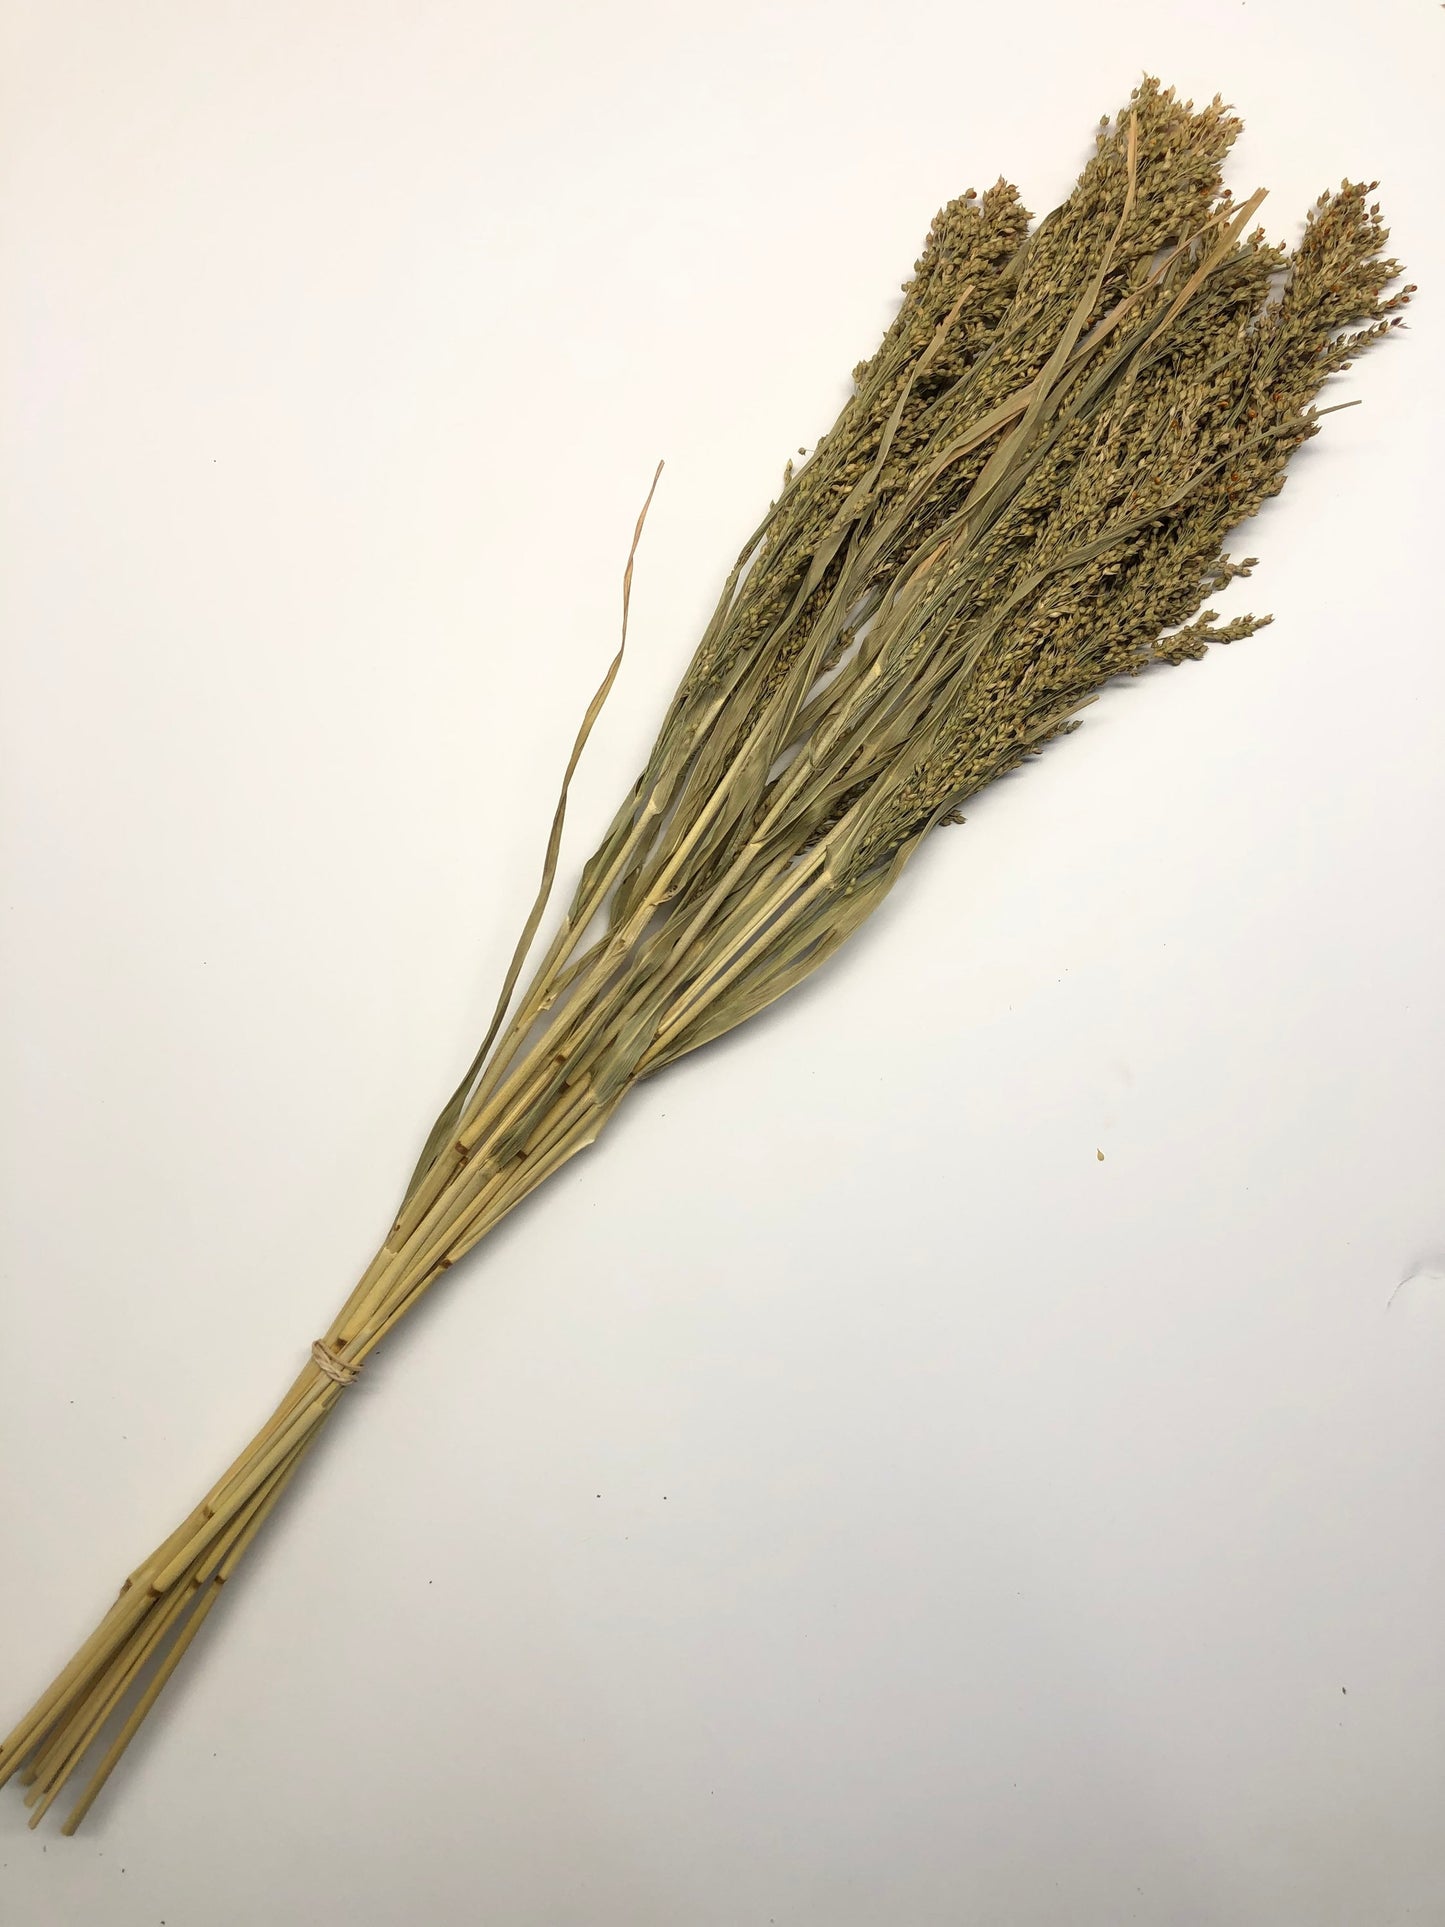 Panicum Grass, Wheat, Dried, Wheat, Preserved Flowers, Floral, Home Decor, Herbs, Millets, Cereal Grains, Wheats and Grass, Filler, Fall